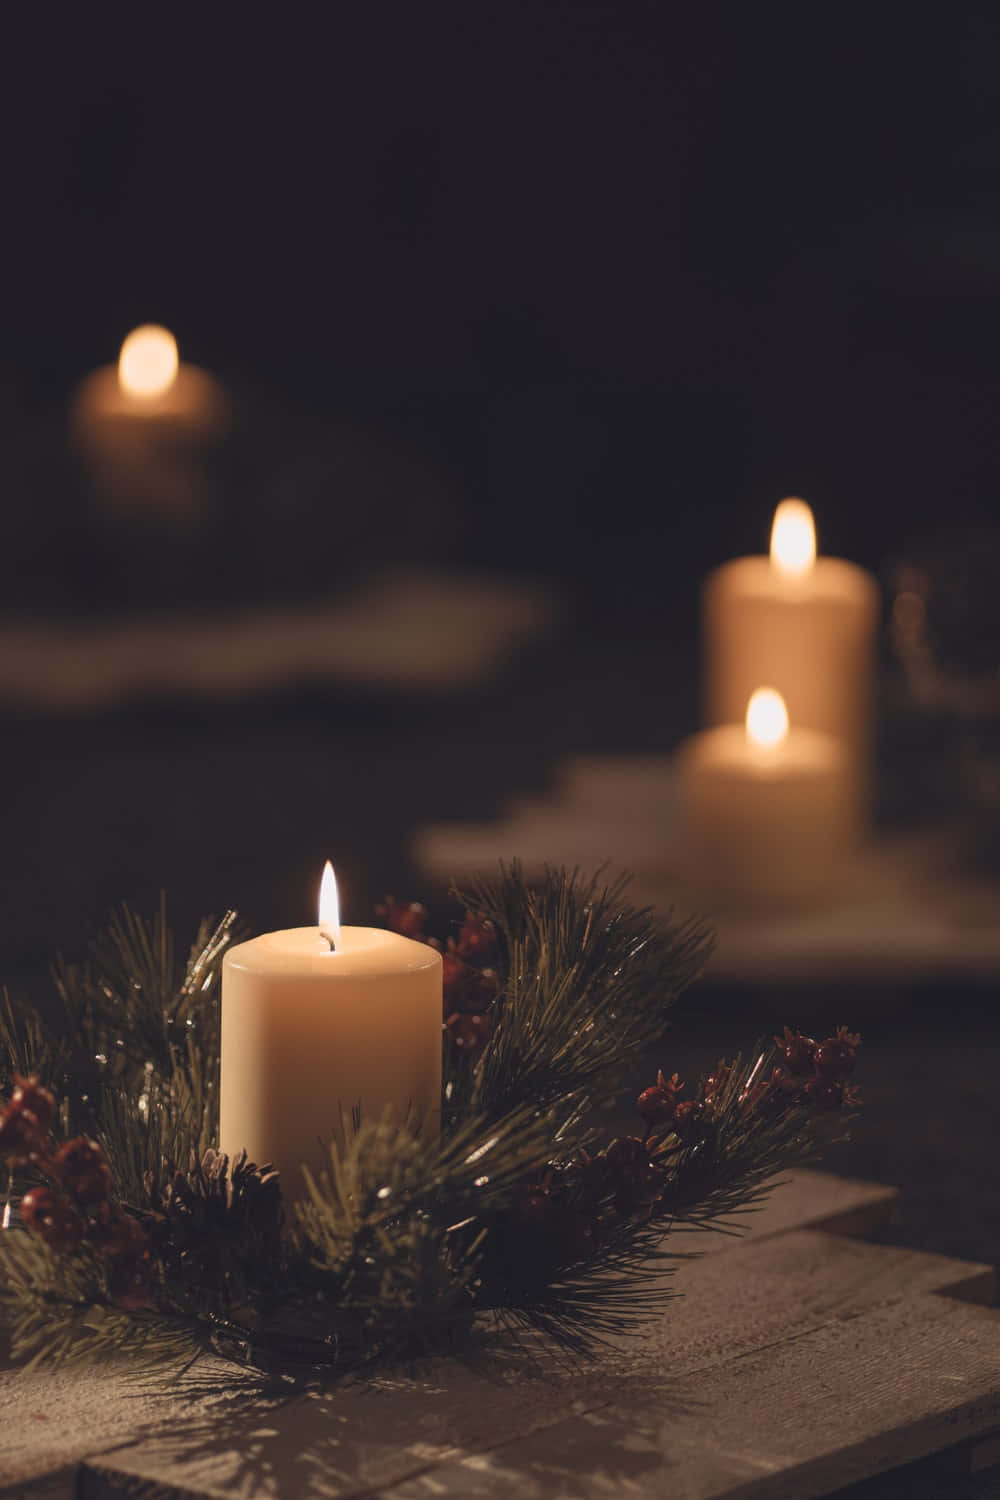 Celebrate Advent with a Prepared Heart